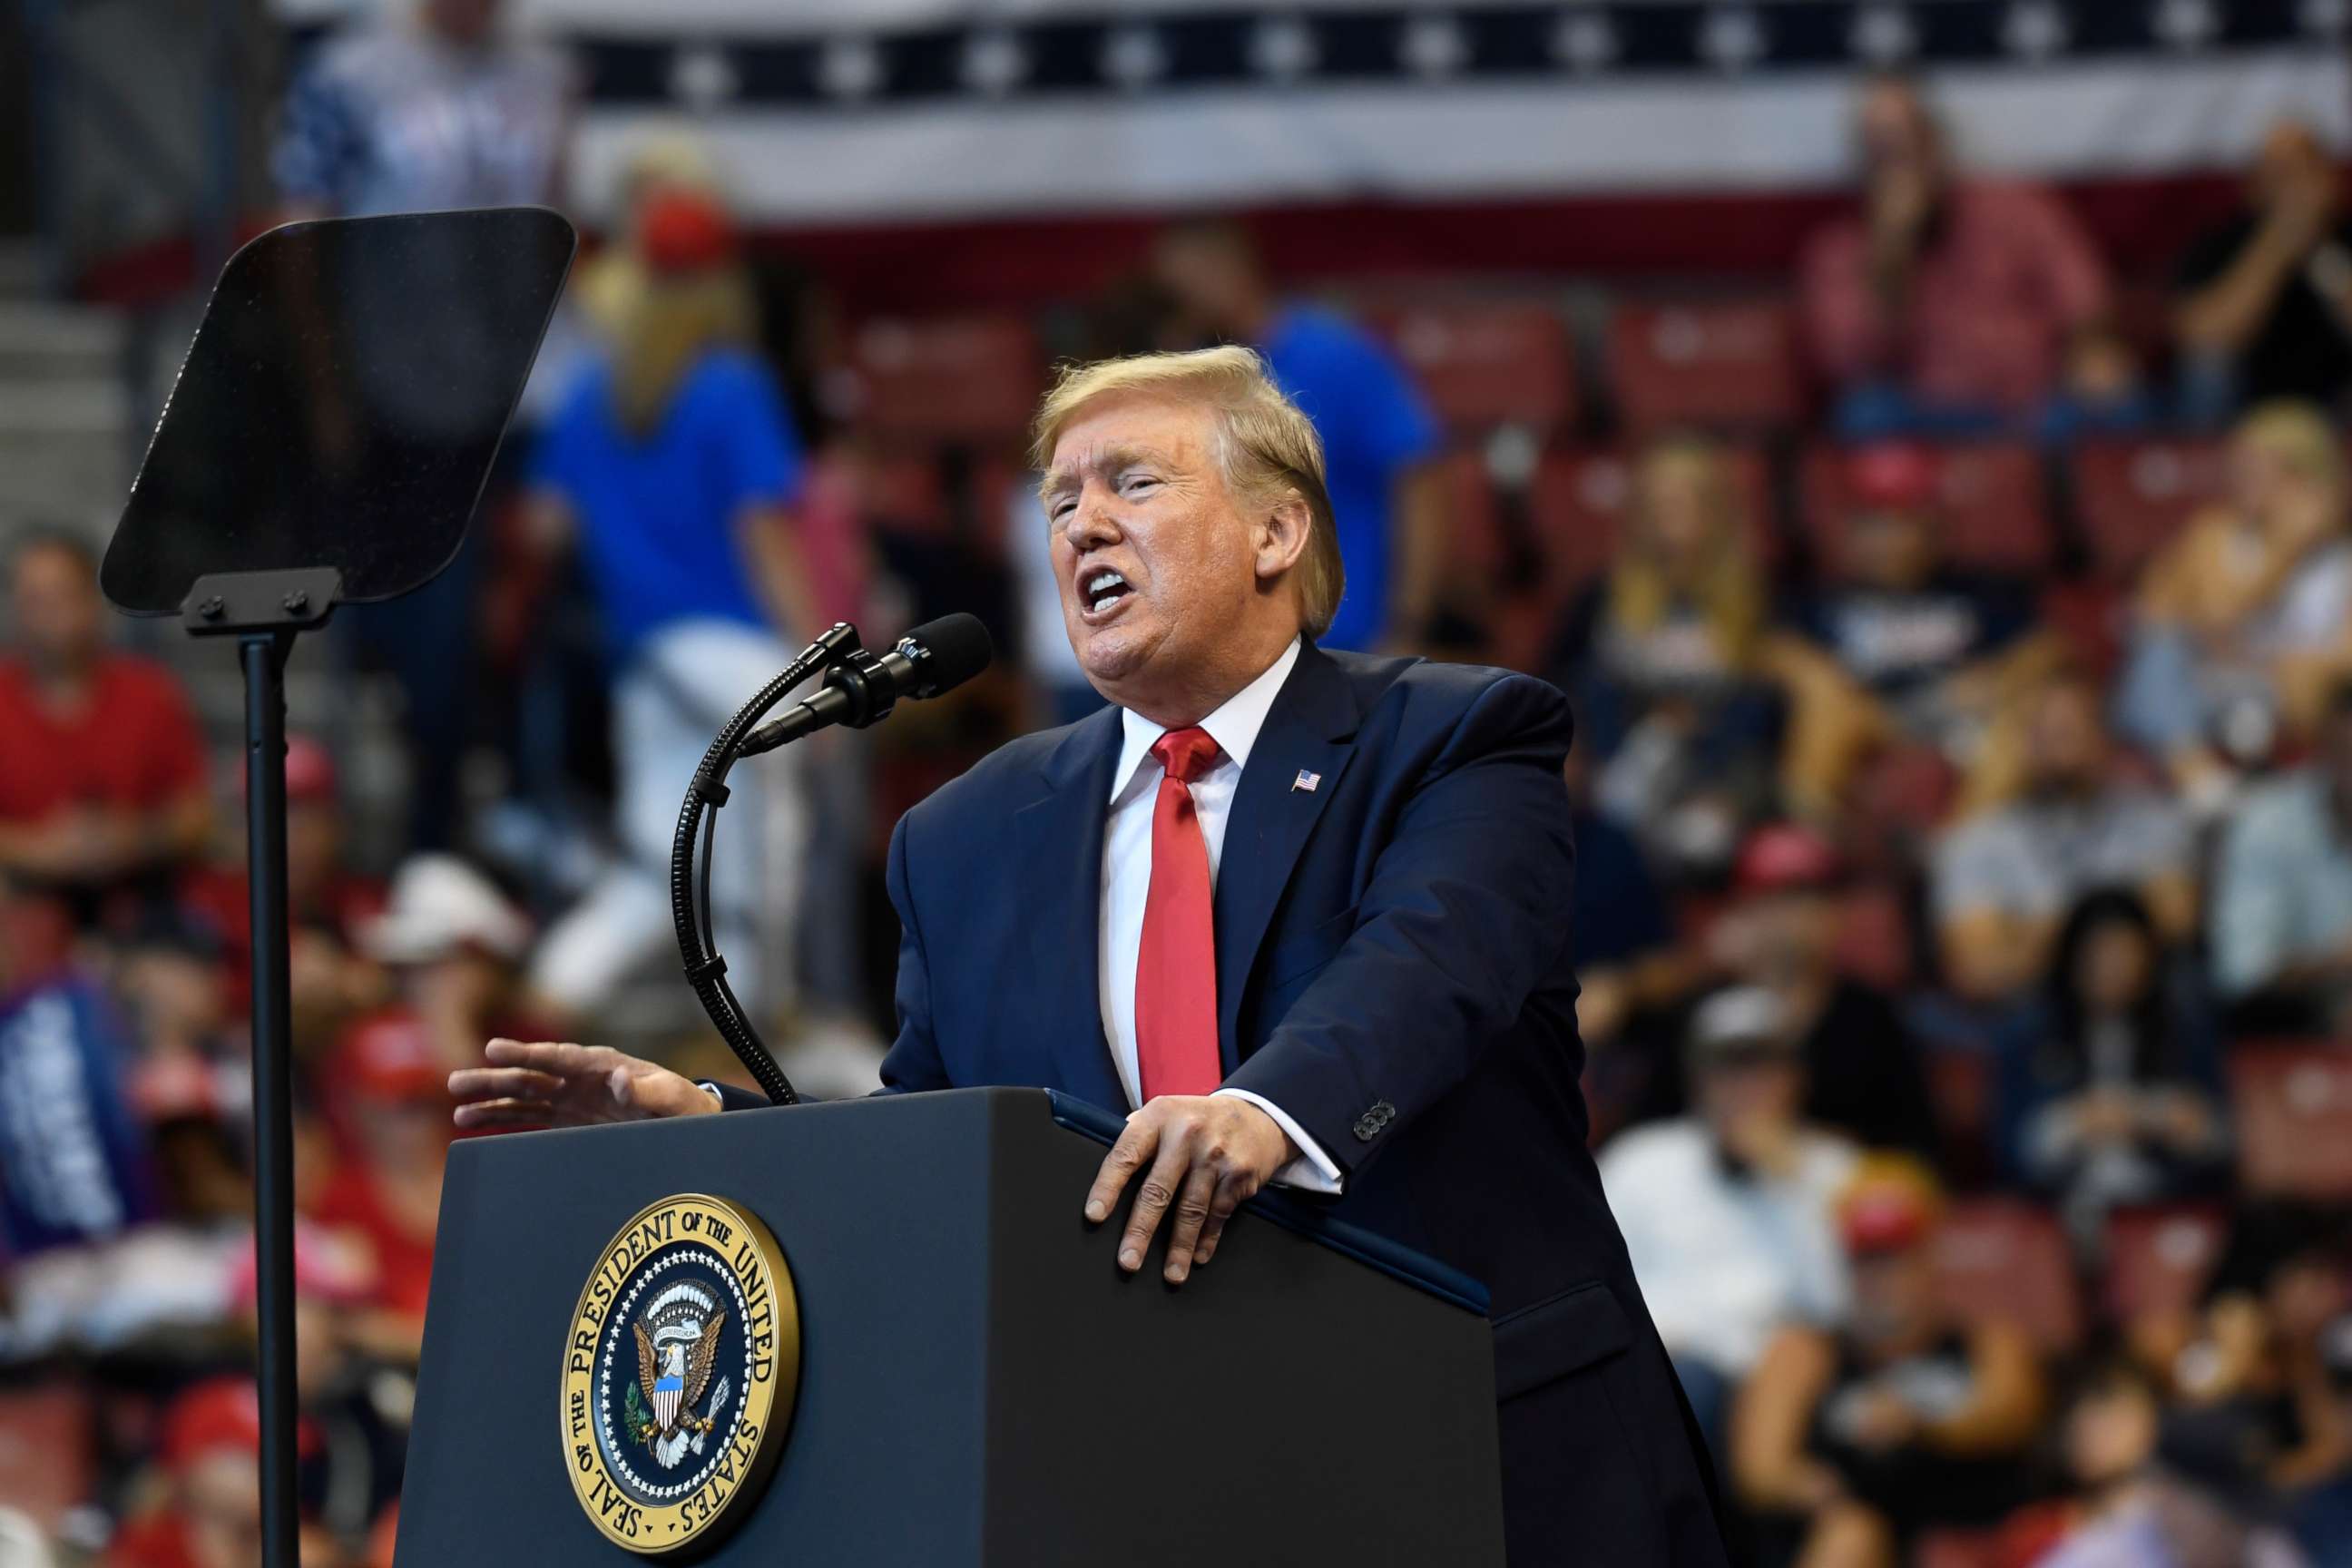 PHOTO: In this Nov. 26, 2019, photo, resident Donald Trump speaks at a campaign rally in Sunrise, Fla.